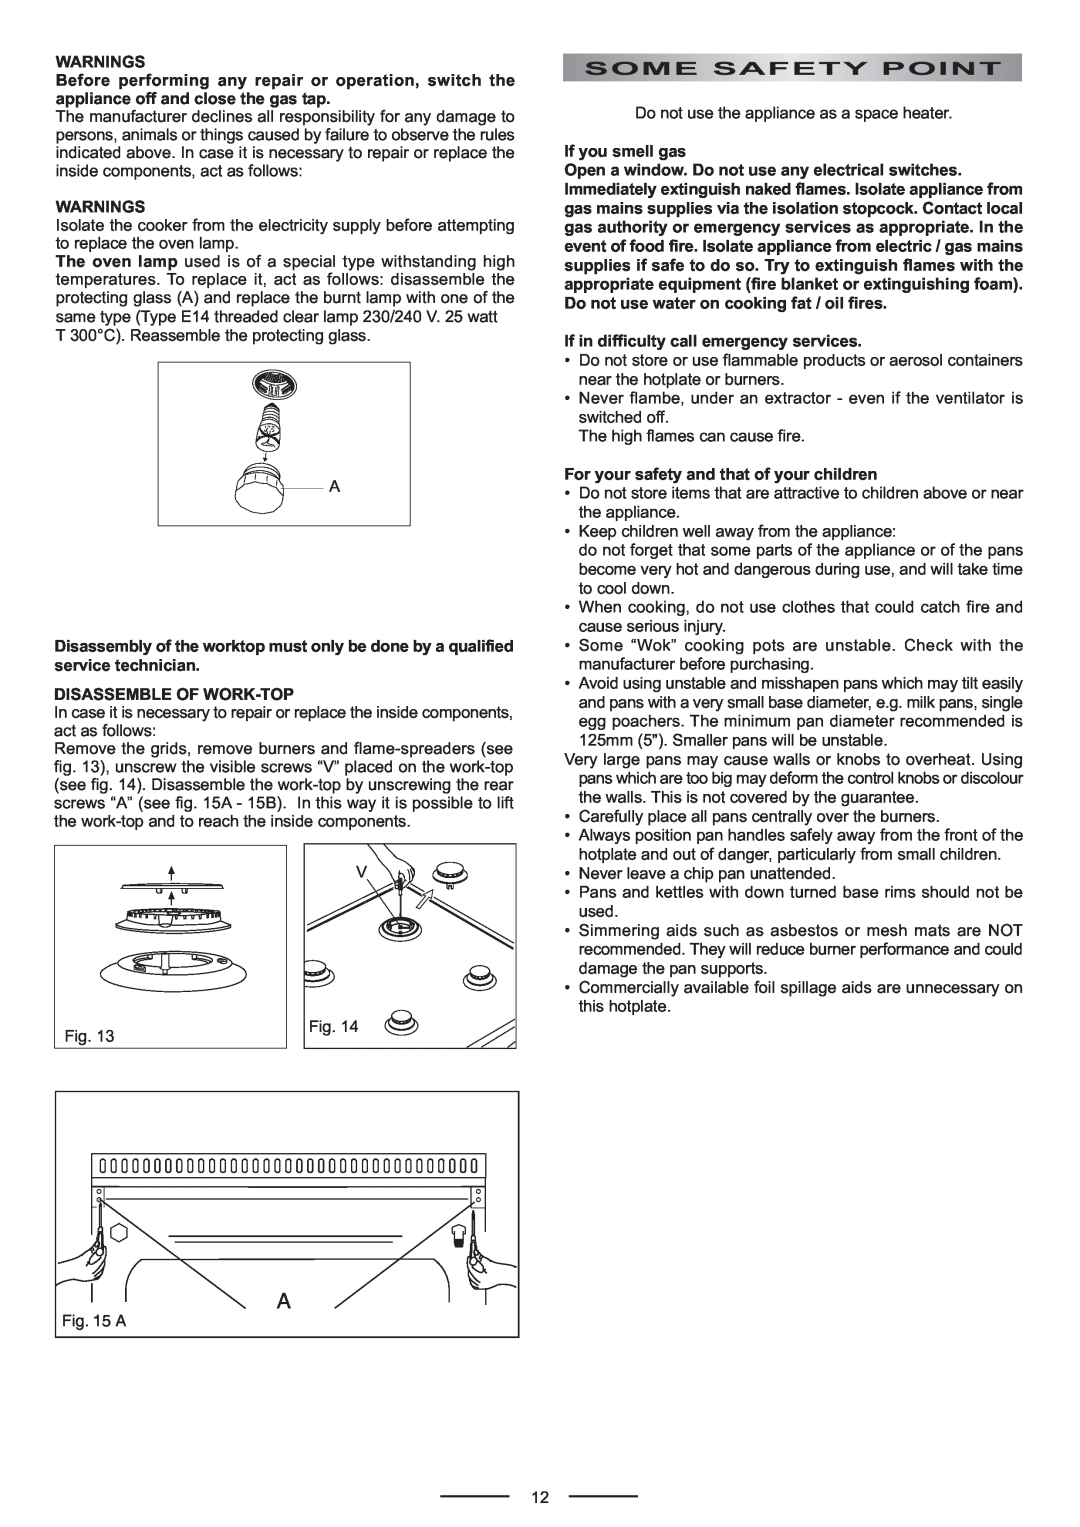 Whirlpool ACG902IX manual Some Safety Point, Warnings, Disassemble Of Work-Top, If you smell gas 